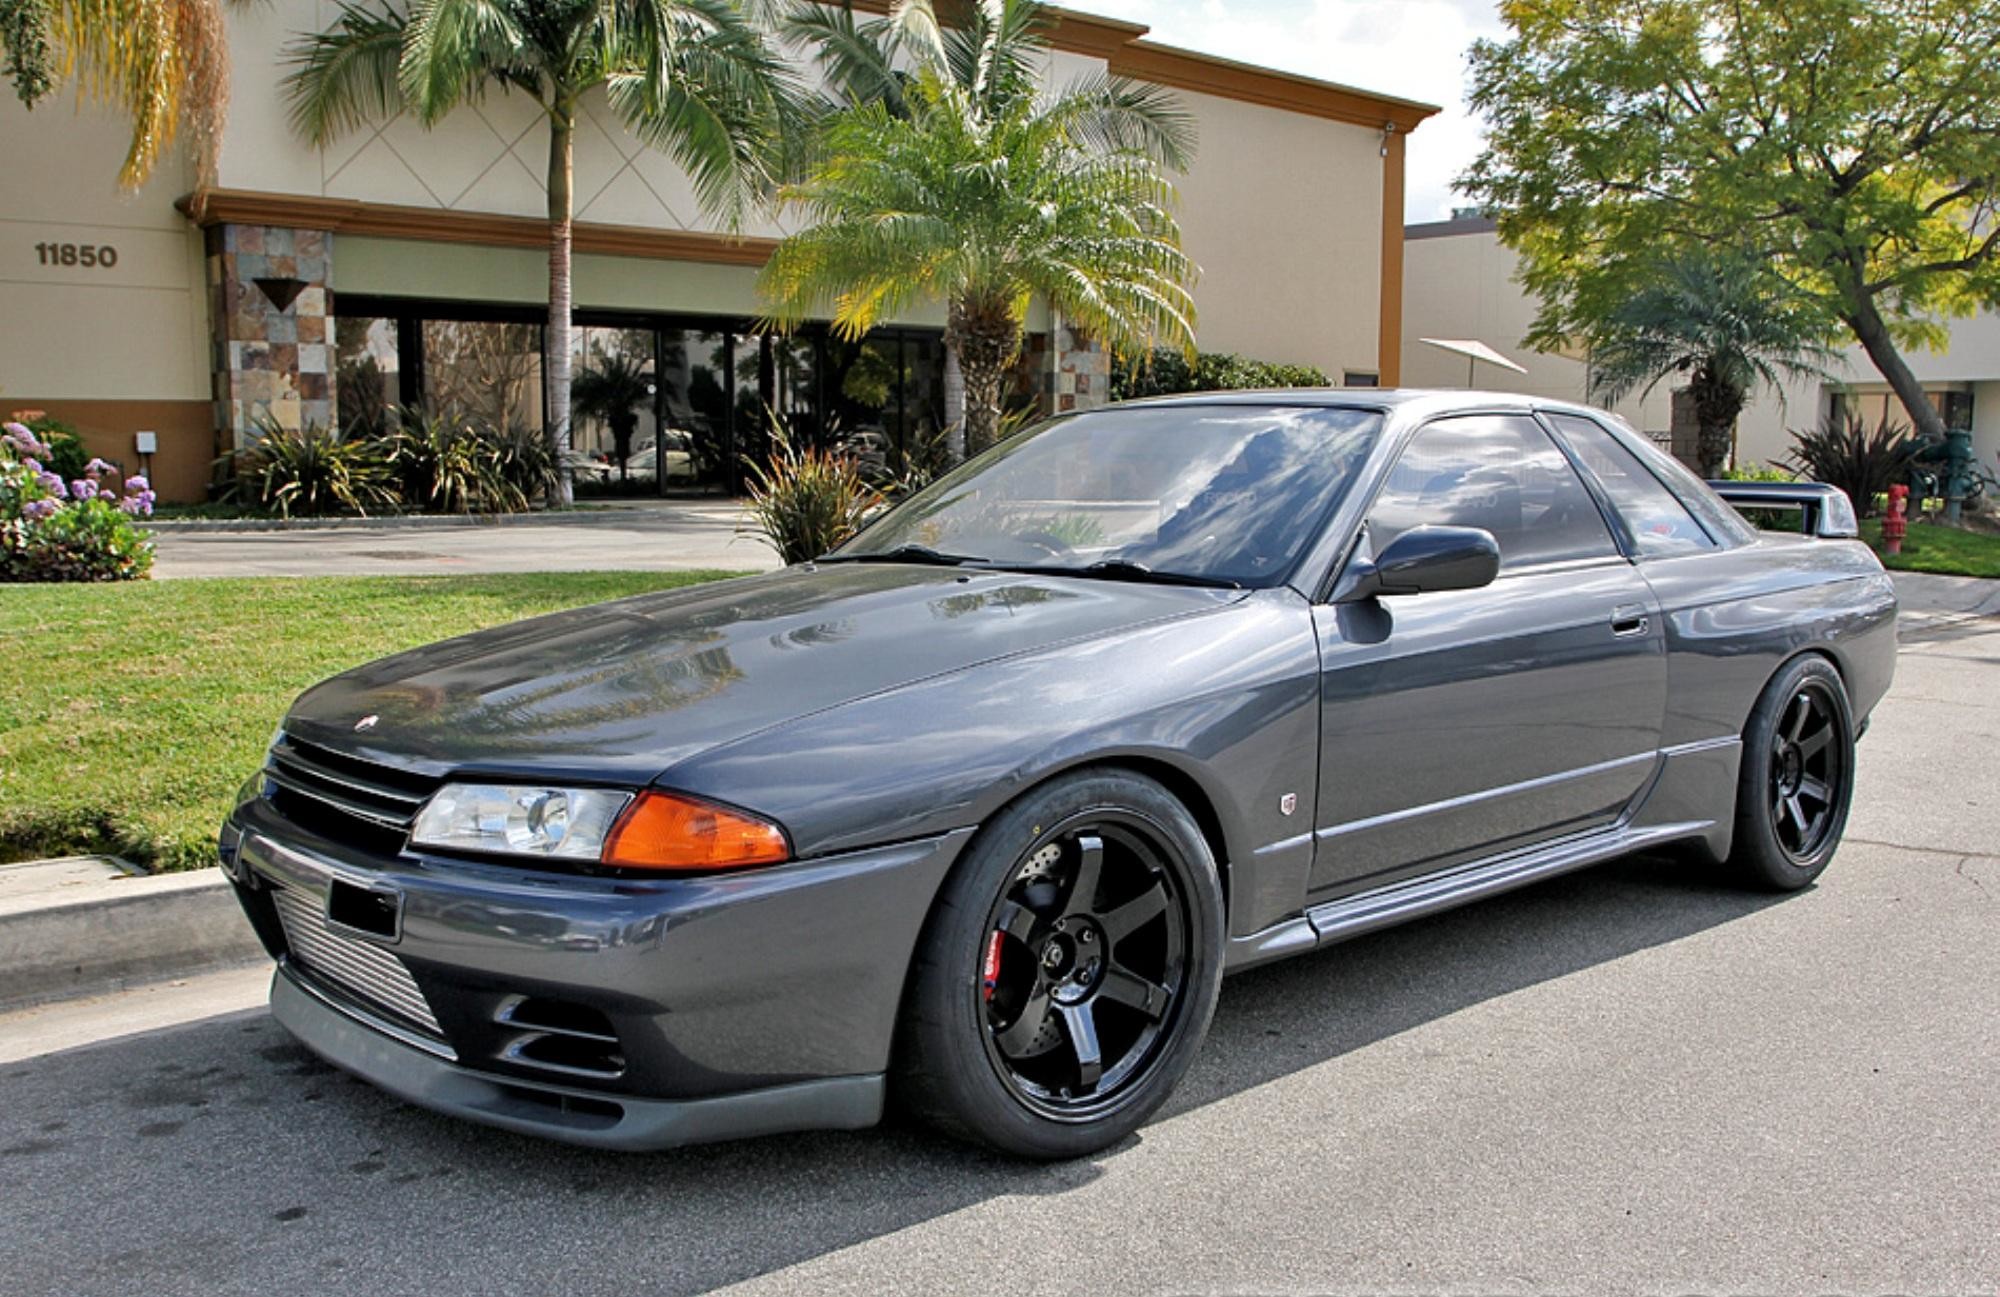 Another one of the top 3 cars I want to have. Nissan Skyline GT-R.